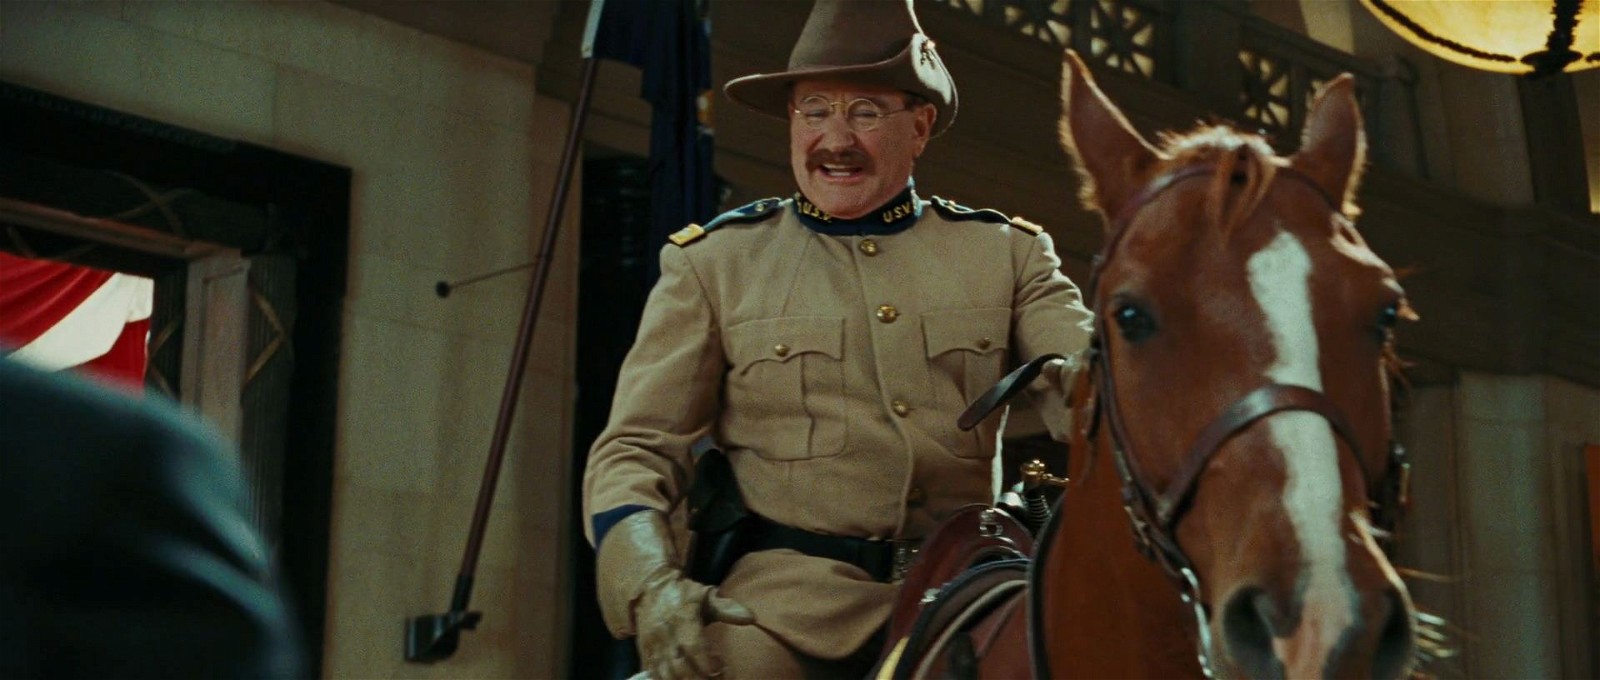 Robin Williams in Night at The Museum 2